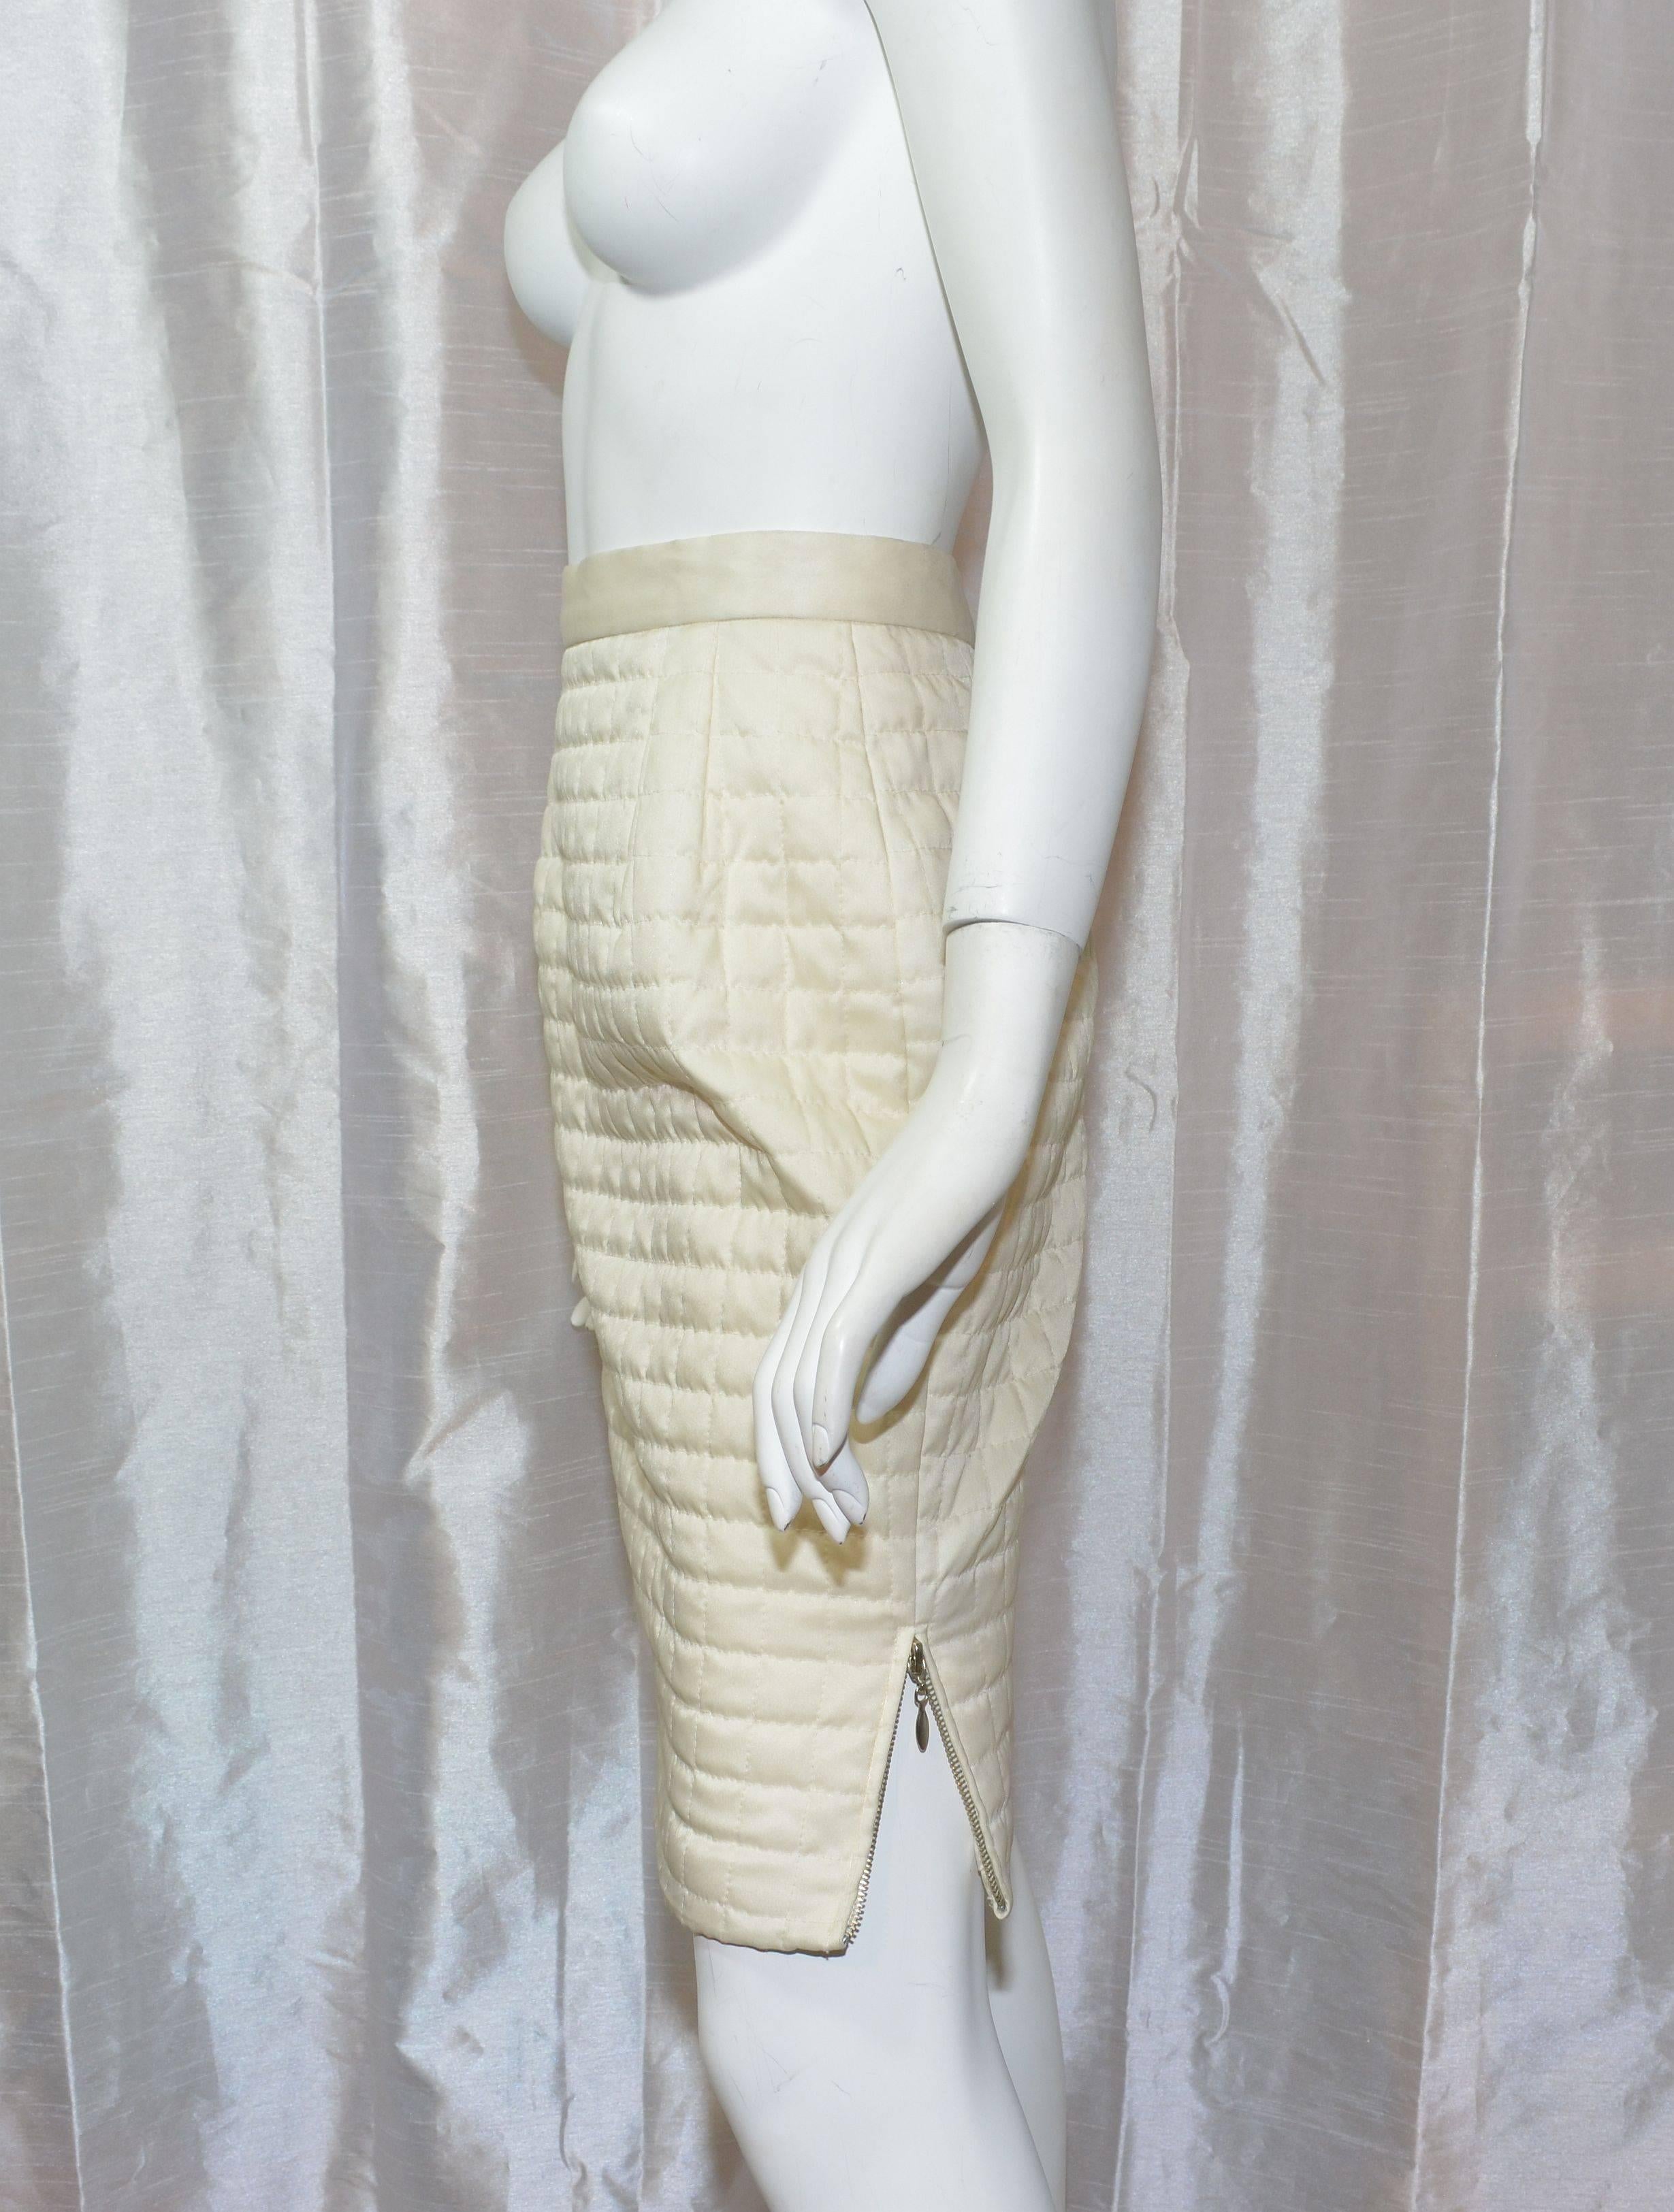 Chanel skirt featured in an ivory-colored satin fabric, with a back zipper closure and a zipper along the left hem . Skirt is fully lined. Measurements: waist - 25'', hips - 34'', length - 21.5''